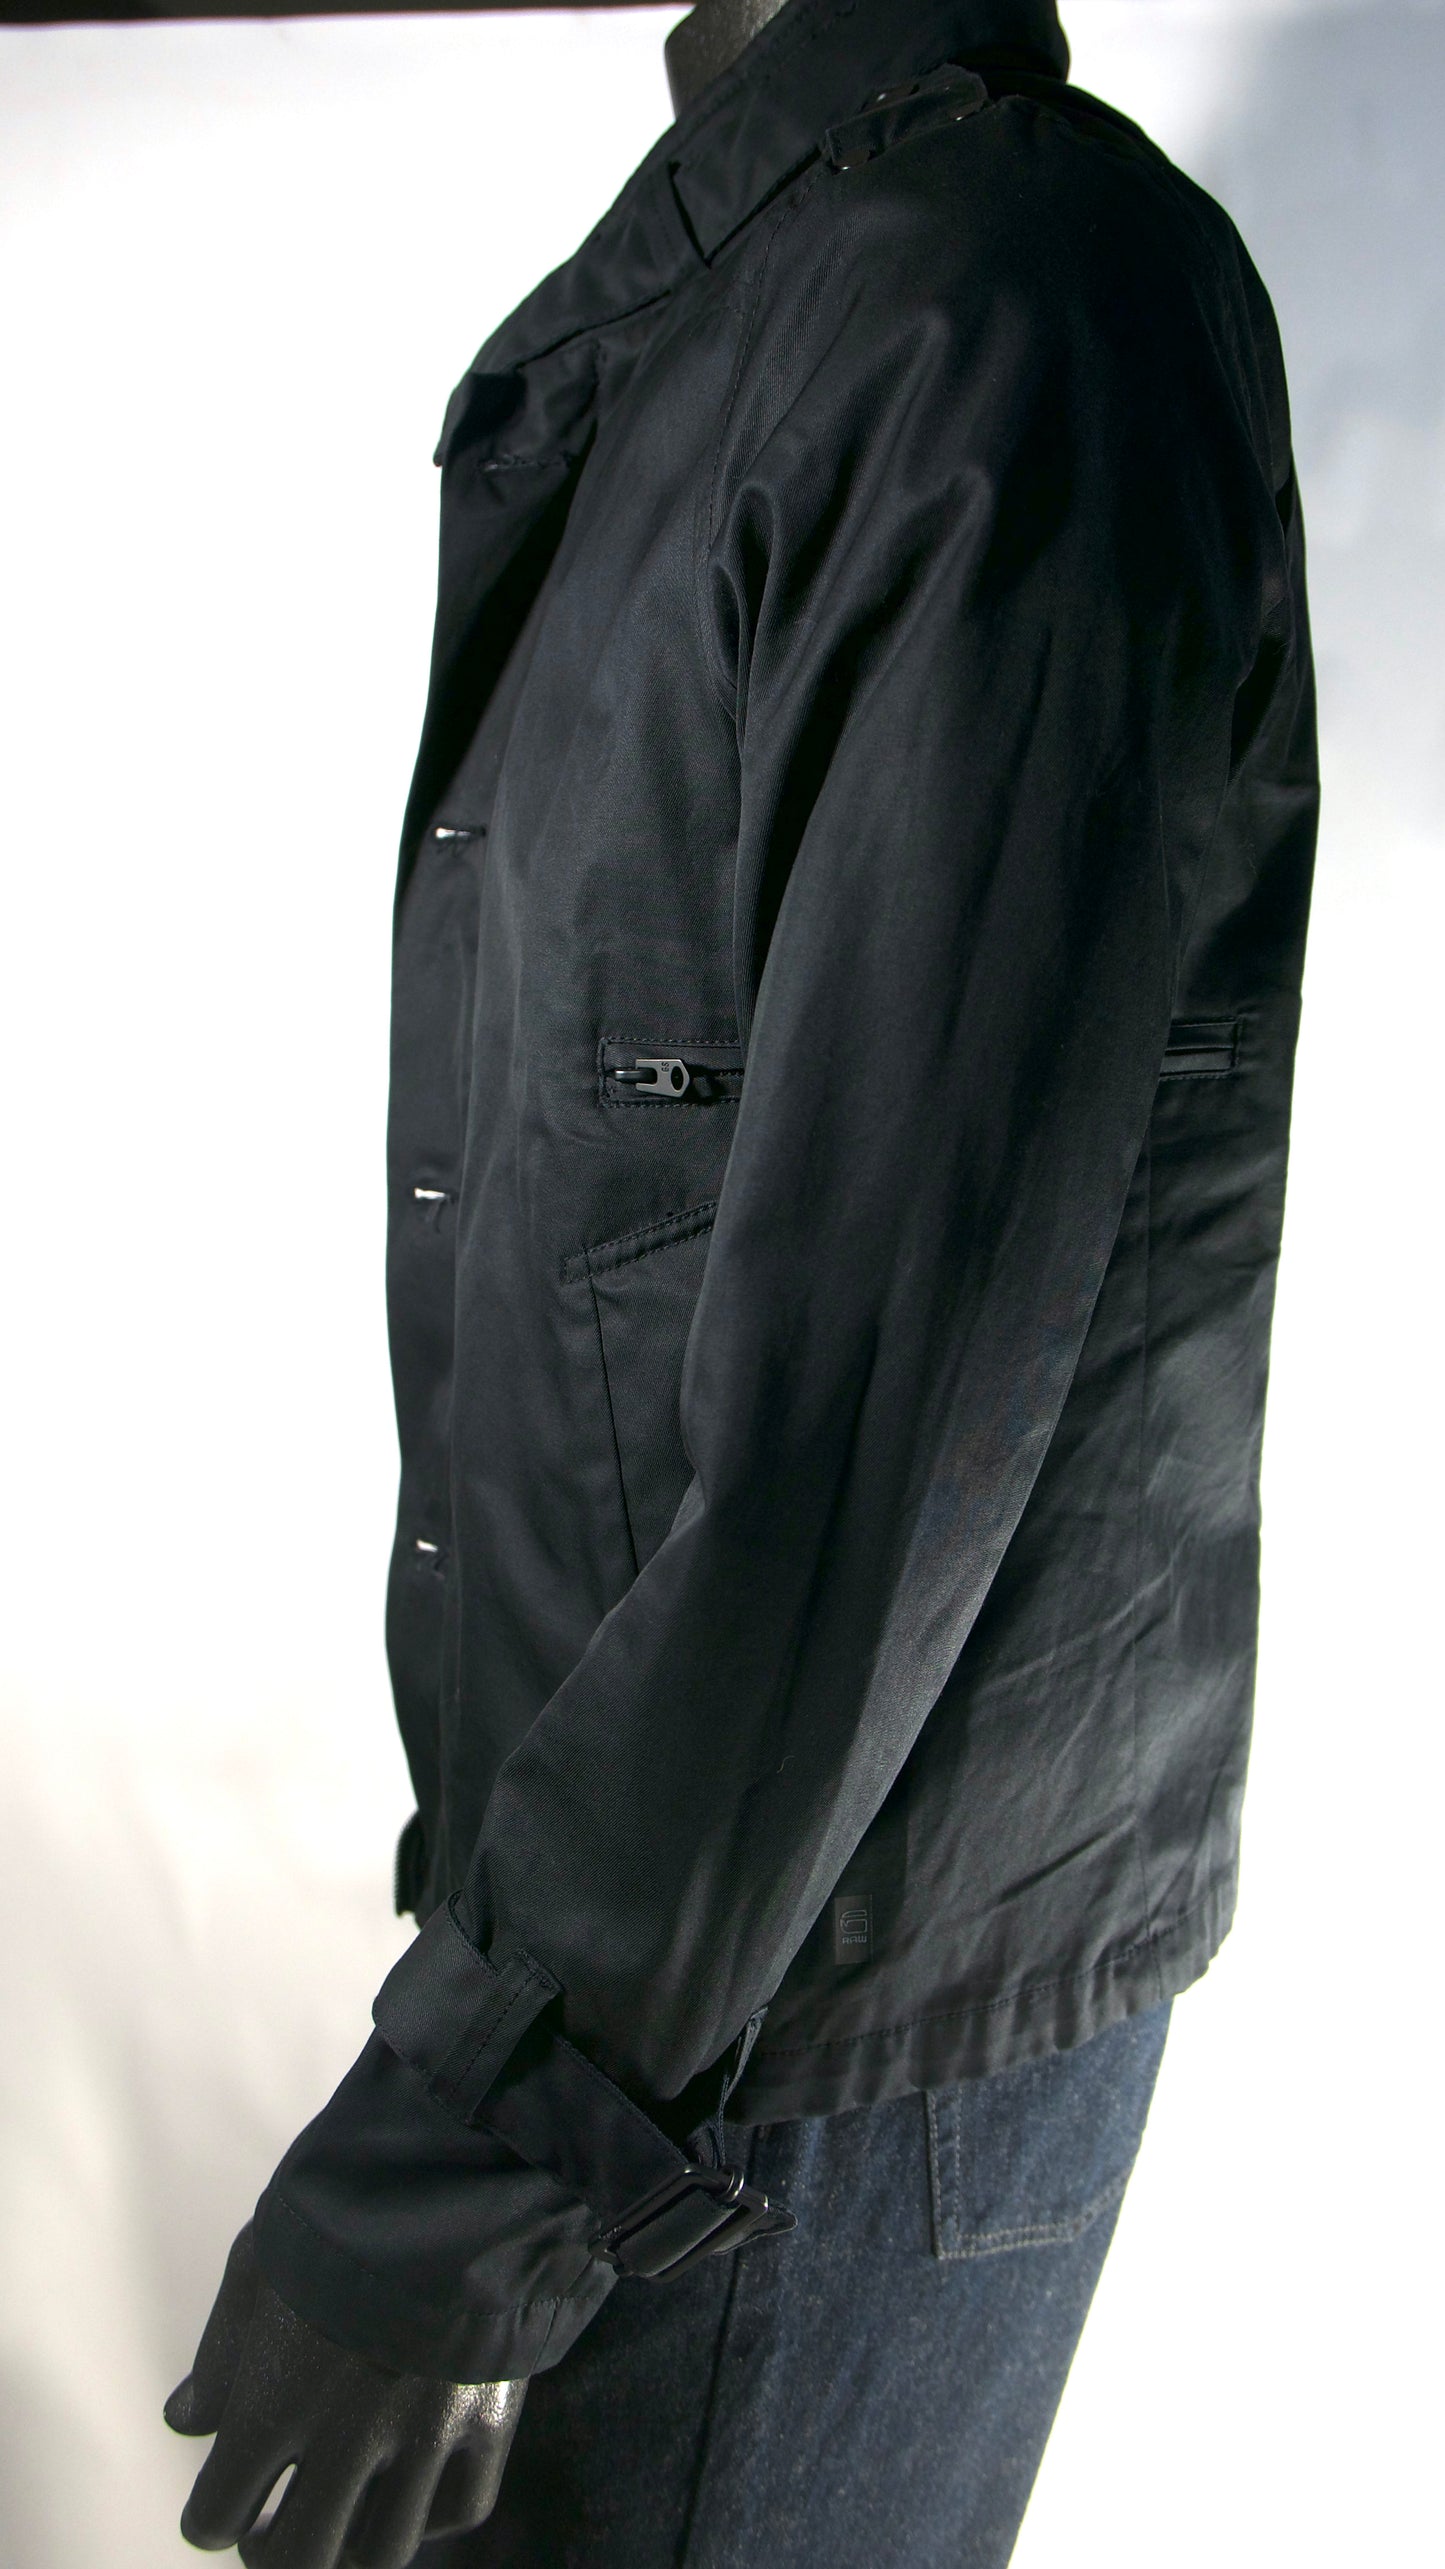 G-Star Waxed Canvas Field Jacket Size Large